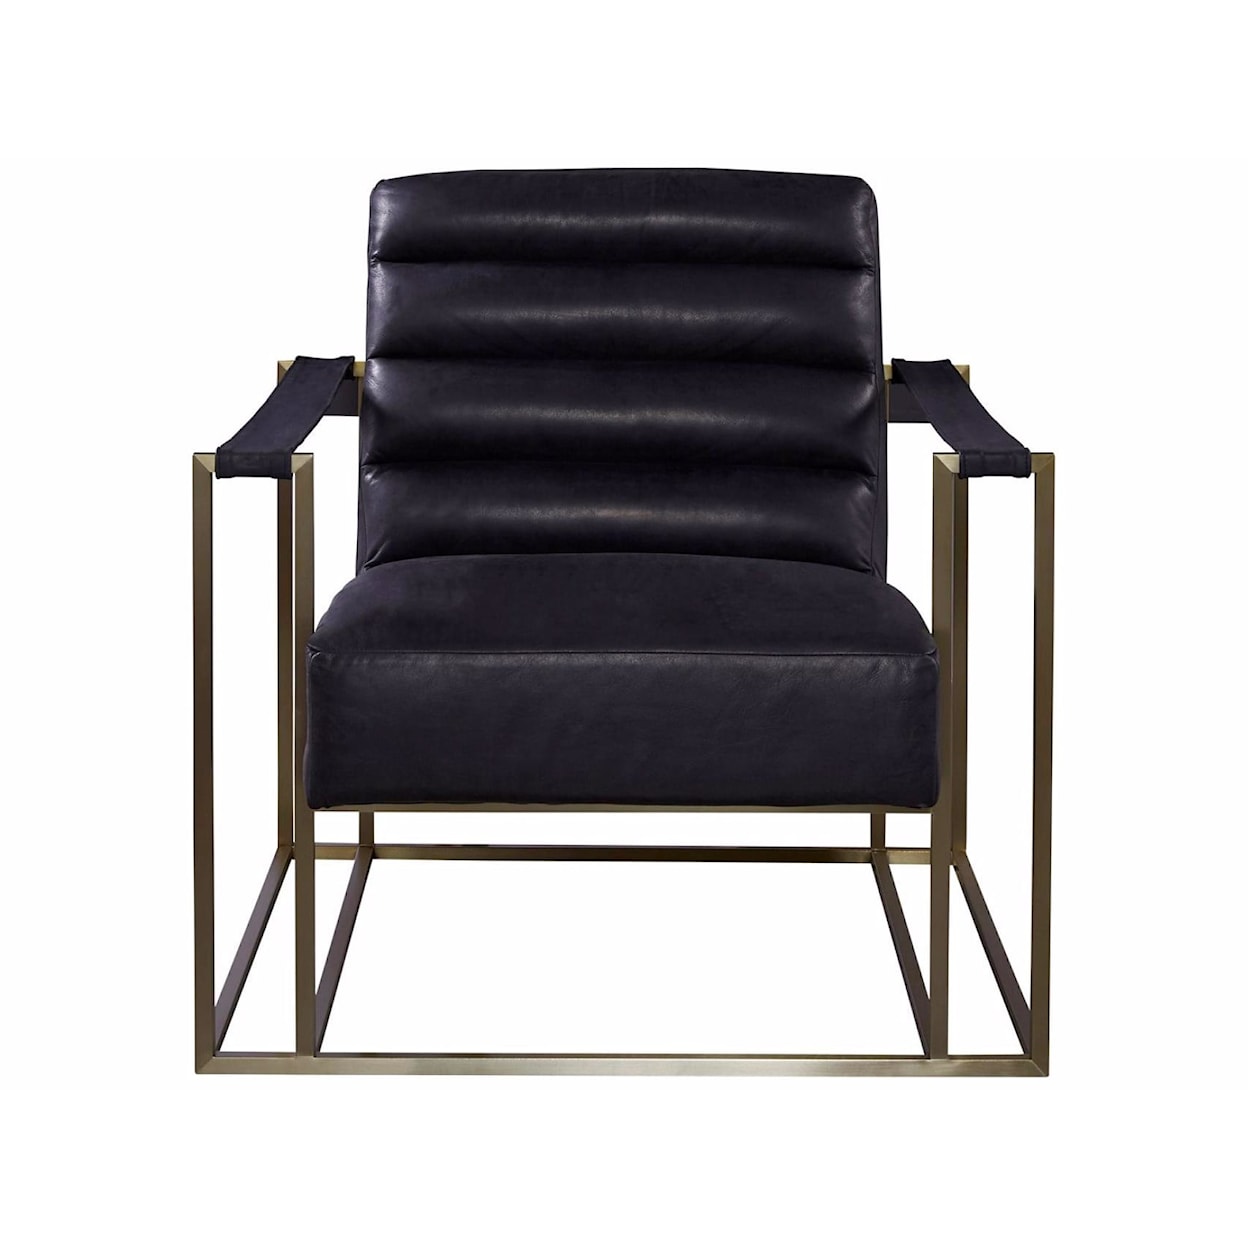 Universal Accents Accent Chair